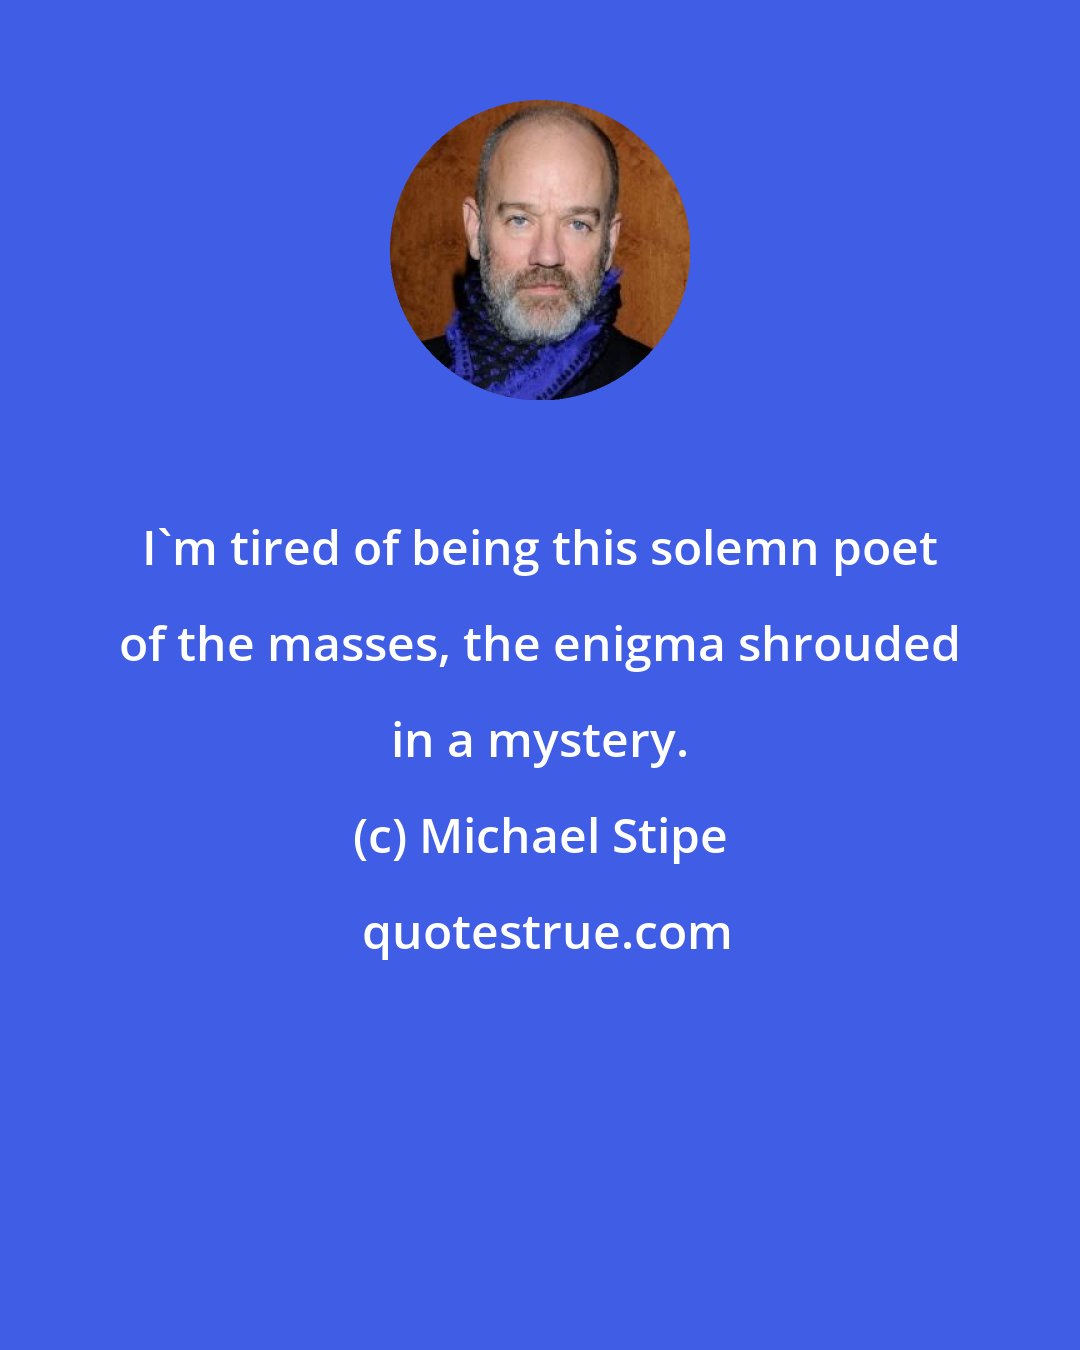 Michael Stipe: I'm tired of being this solemn poet of the masses, the enigma shrouded in a mystery.